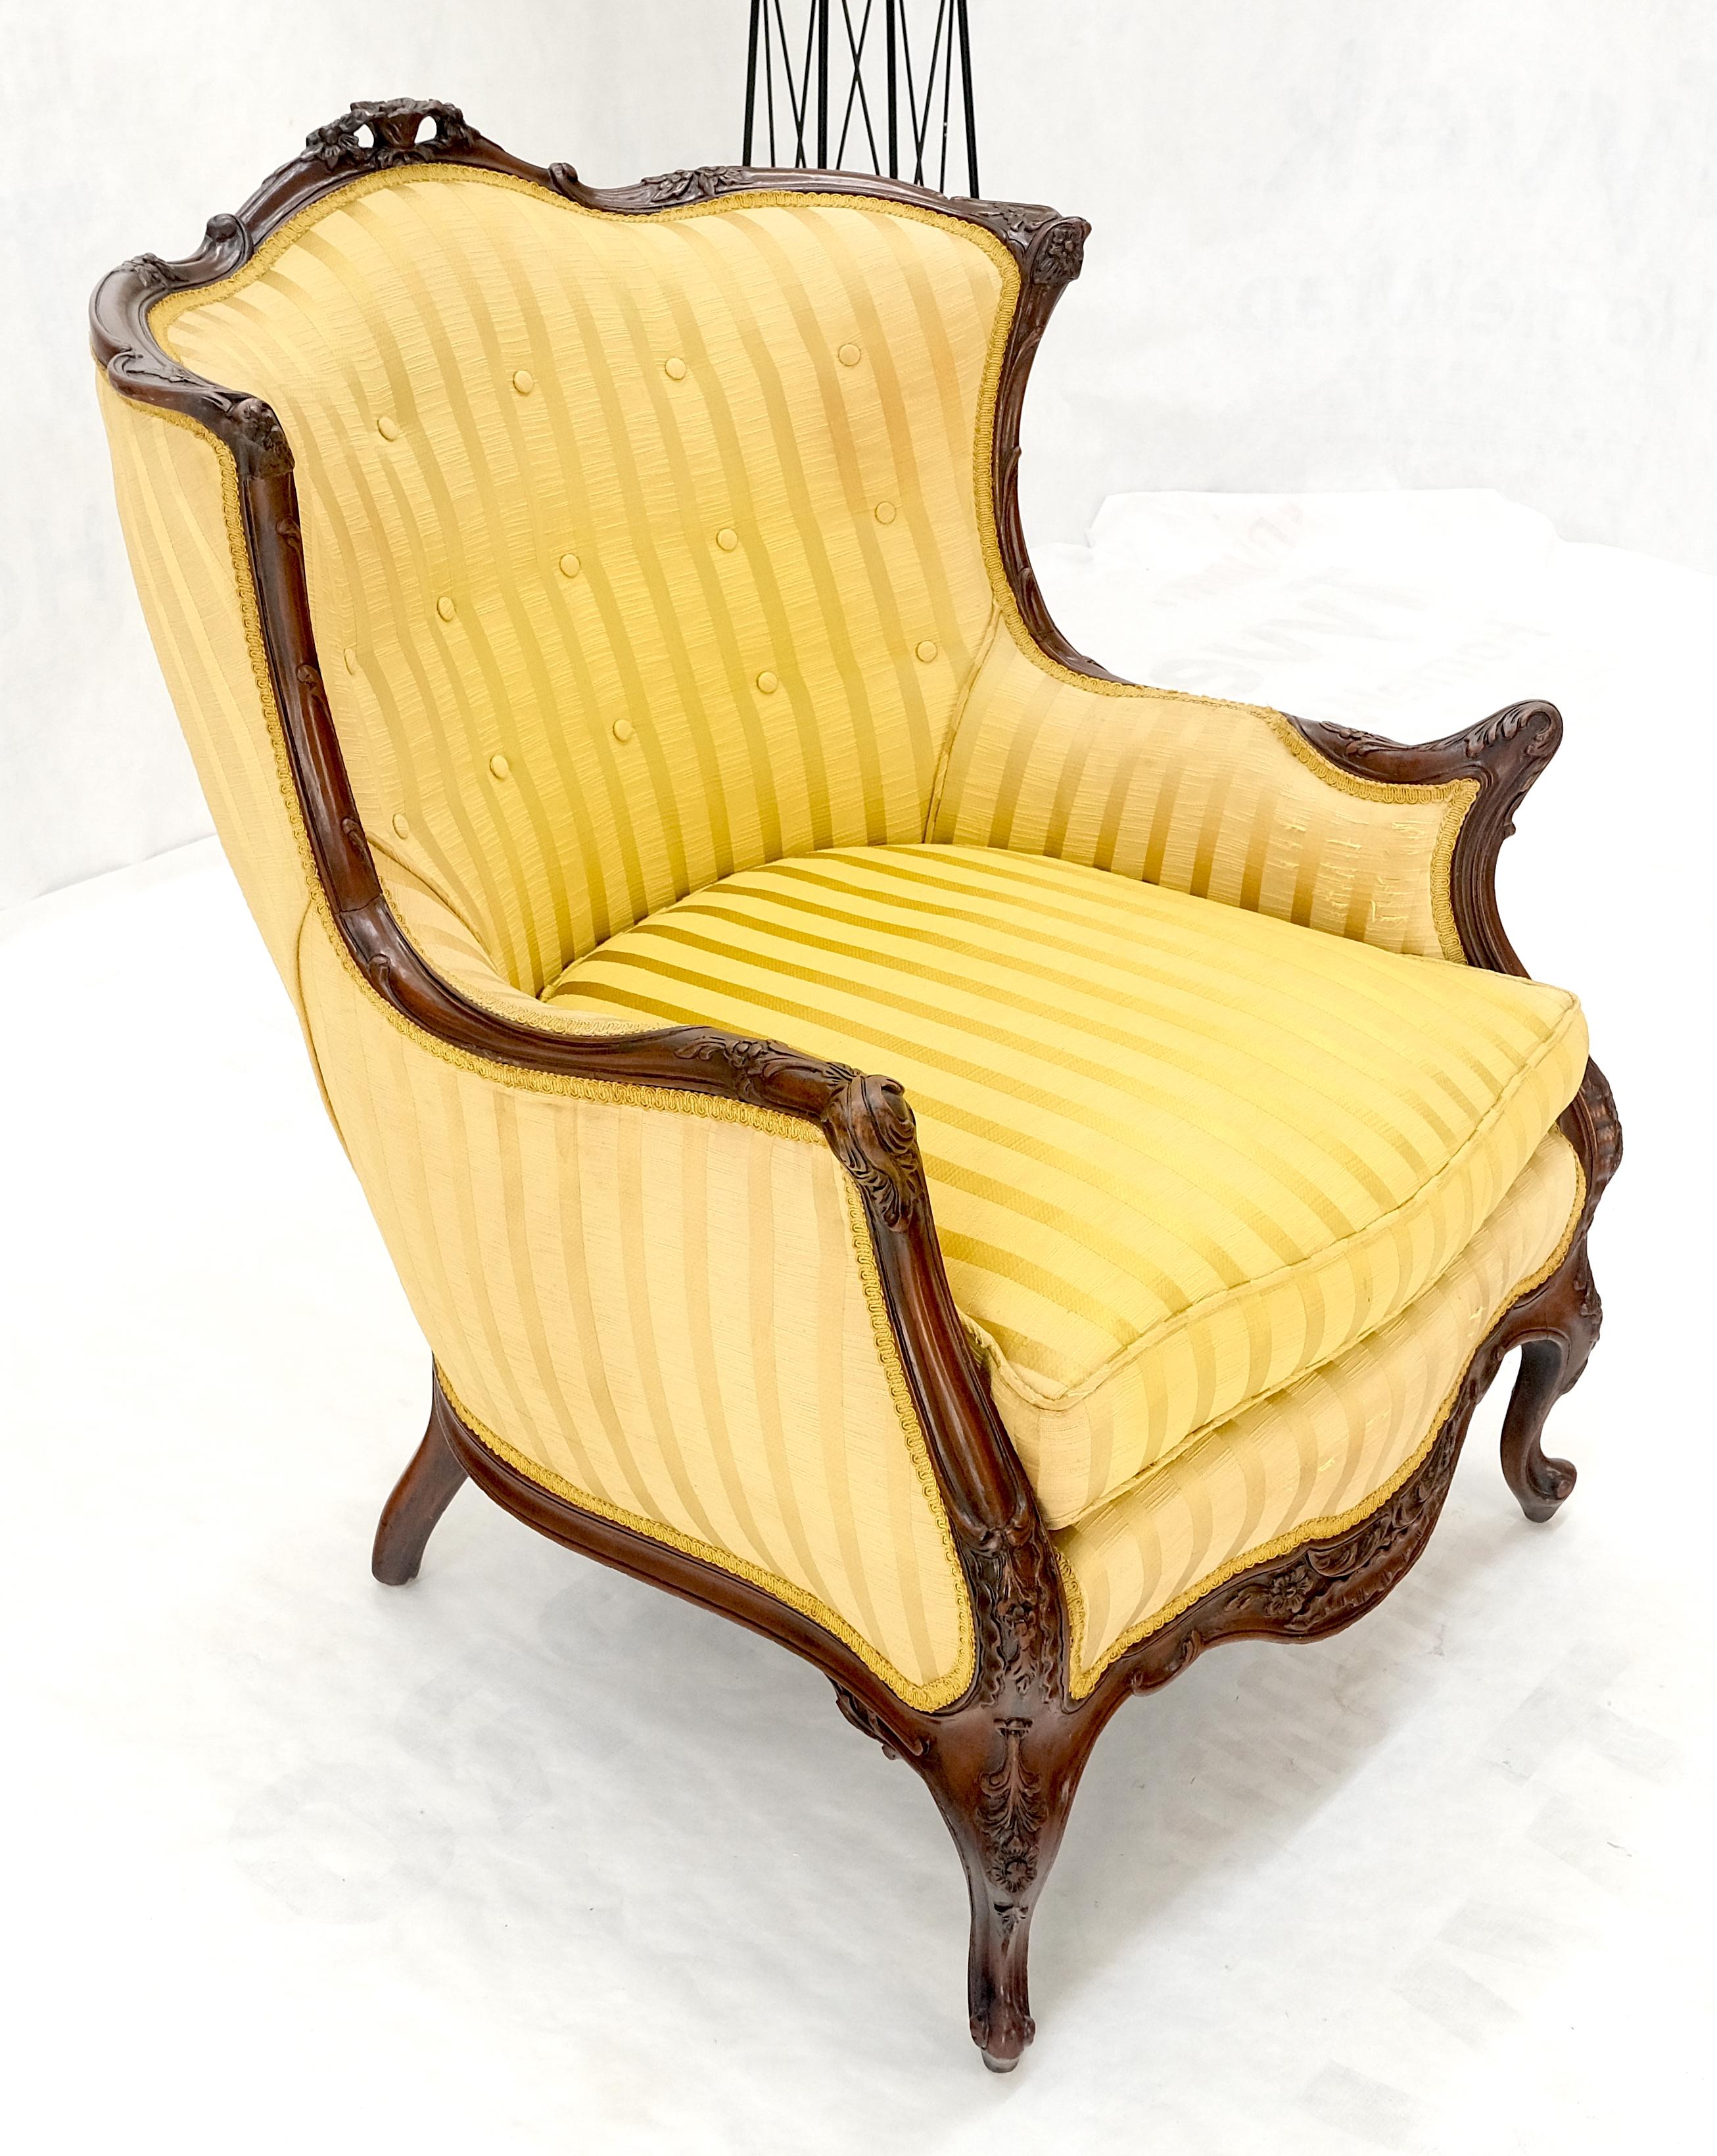 Striped Gold Upholstery Fine Deep Carved Mahogany Frame Lounge Chair Solid Frame For Sale 1